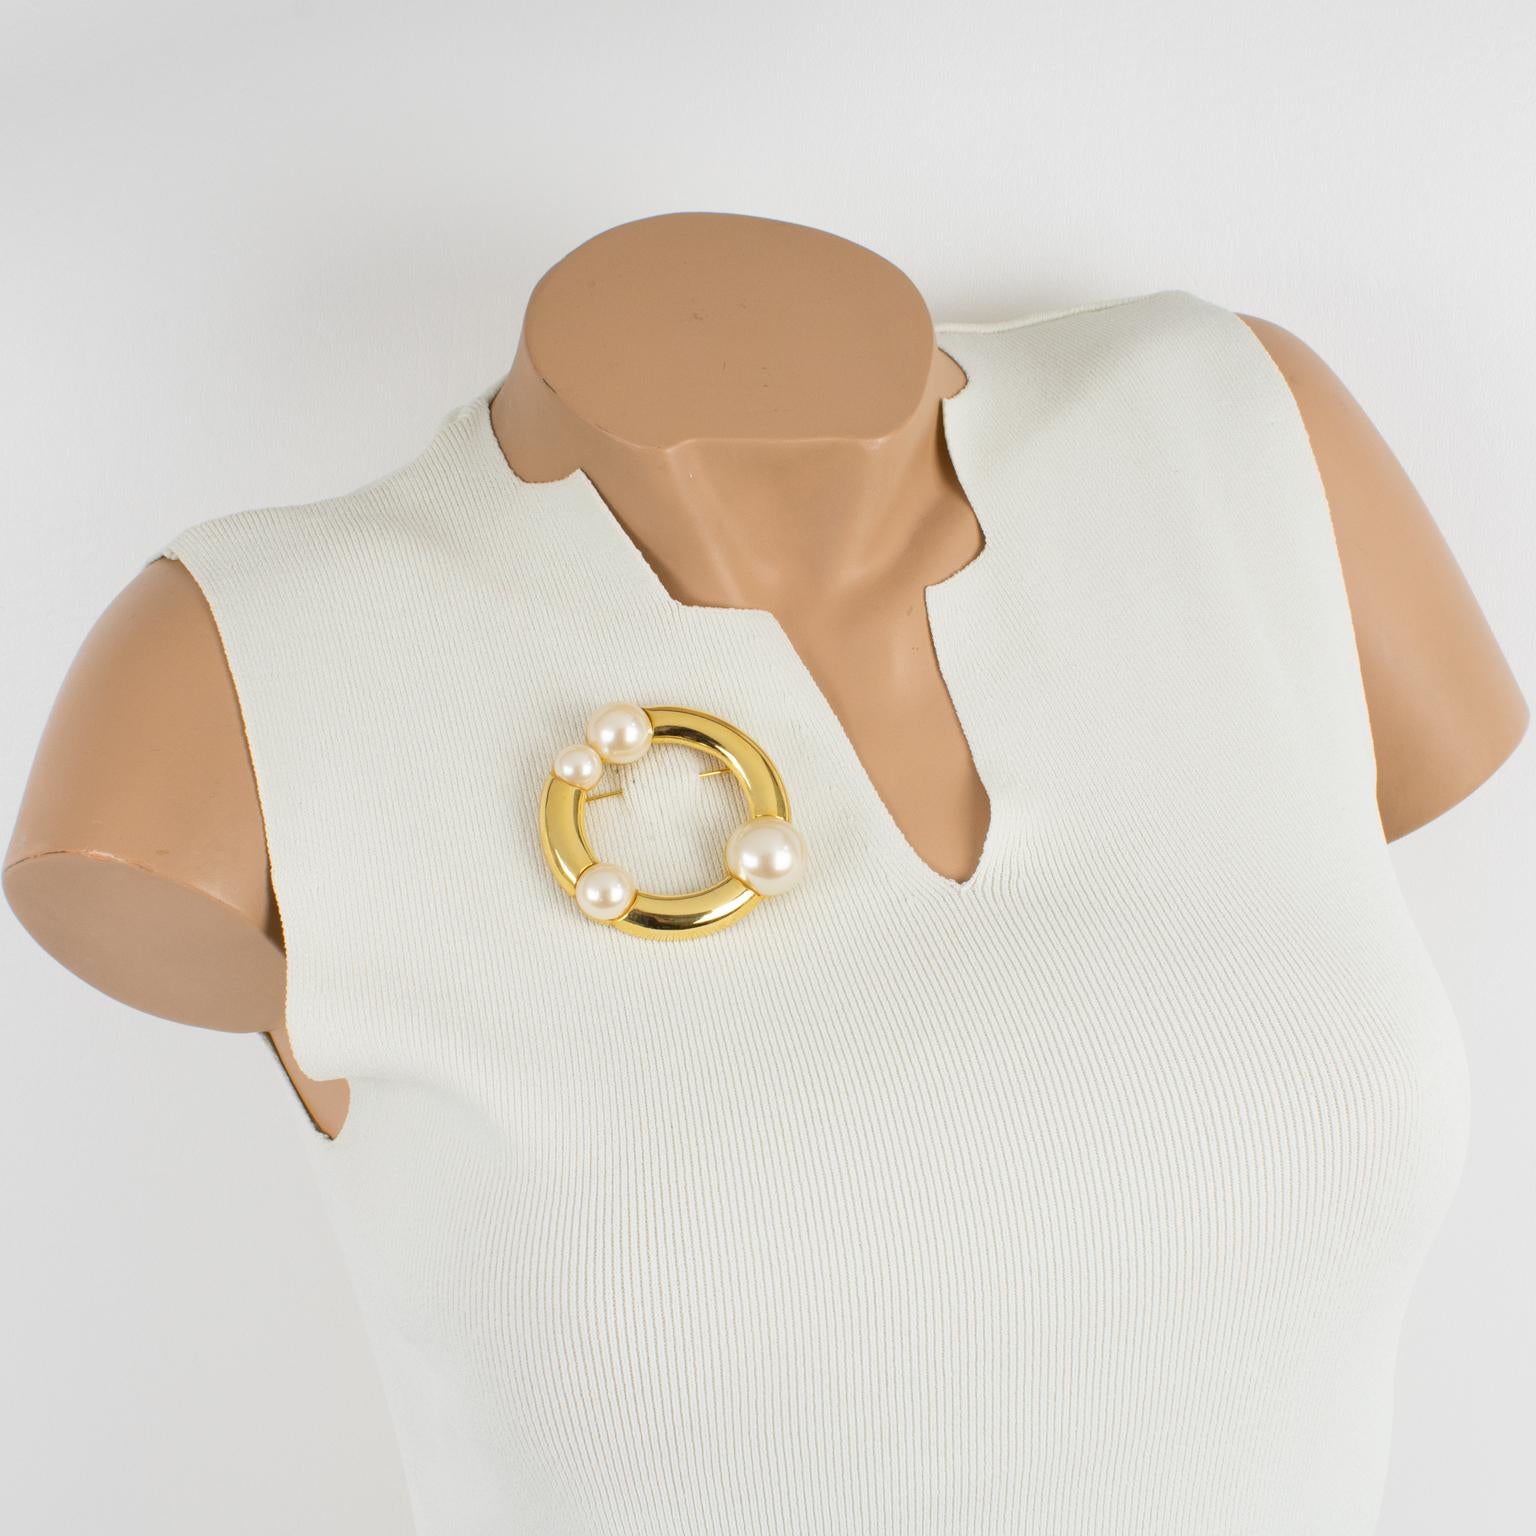 This elegant Courreges Paris modernist pin brooch features a dimensional and rounded donut shape, with shiny gilt metal ornate with pearl-like half beads in assorted shapes. The pin has a security closing clasp and is signed on the underside with